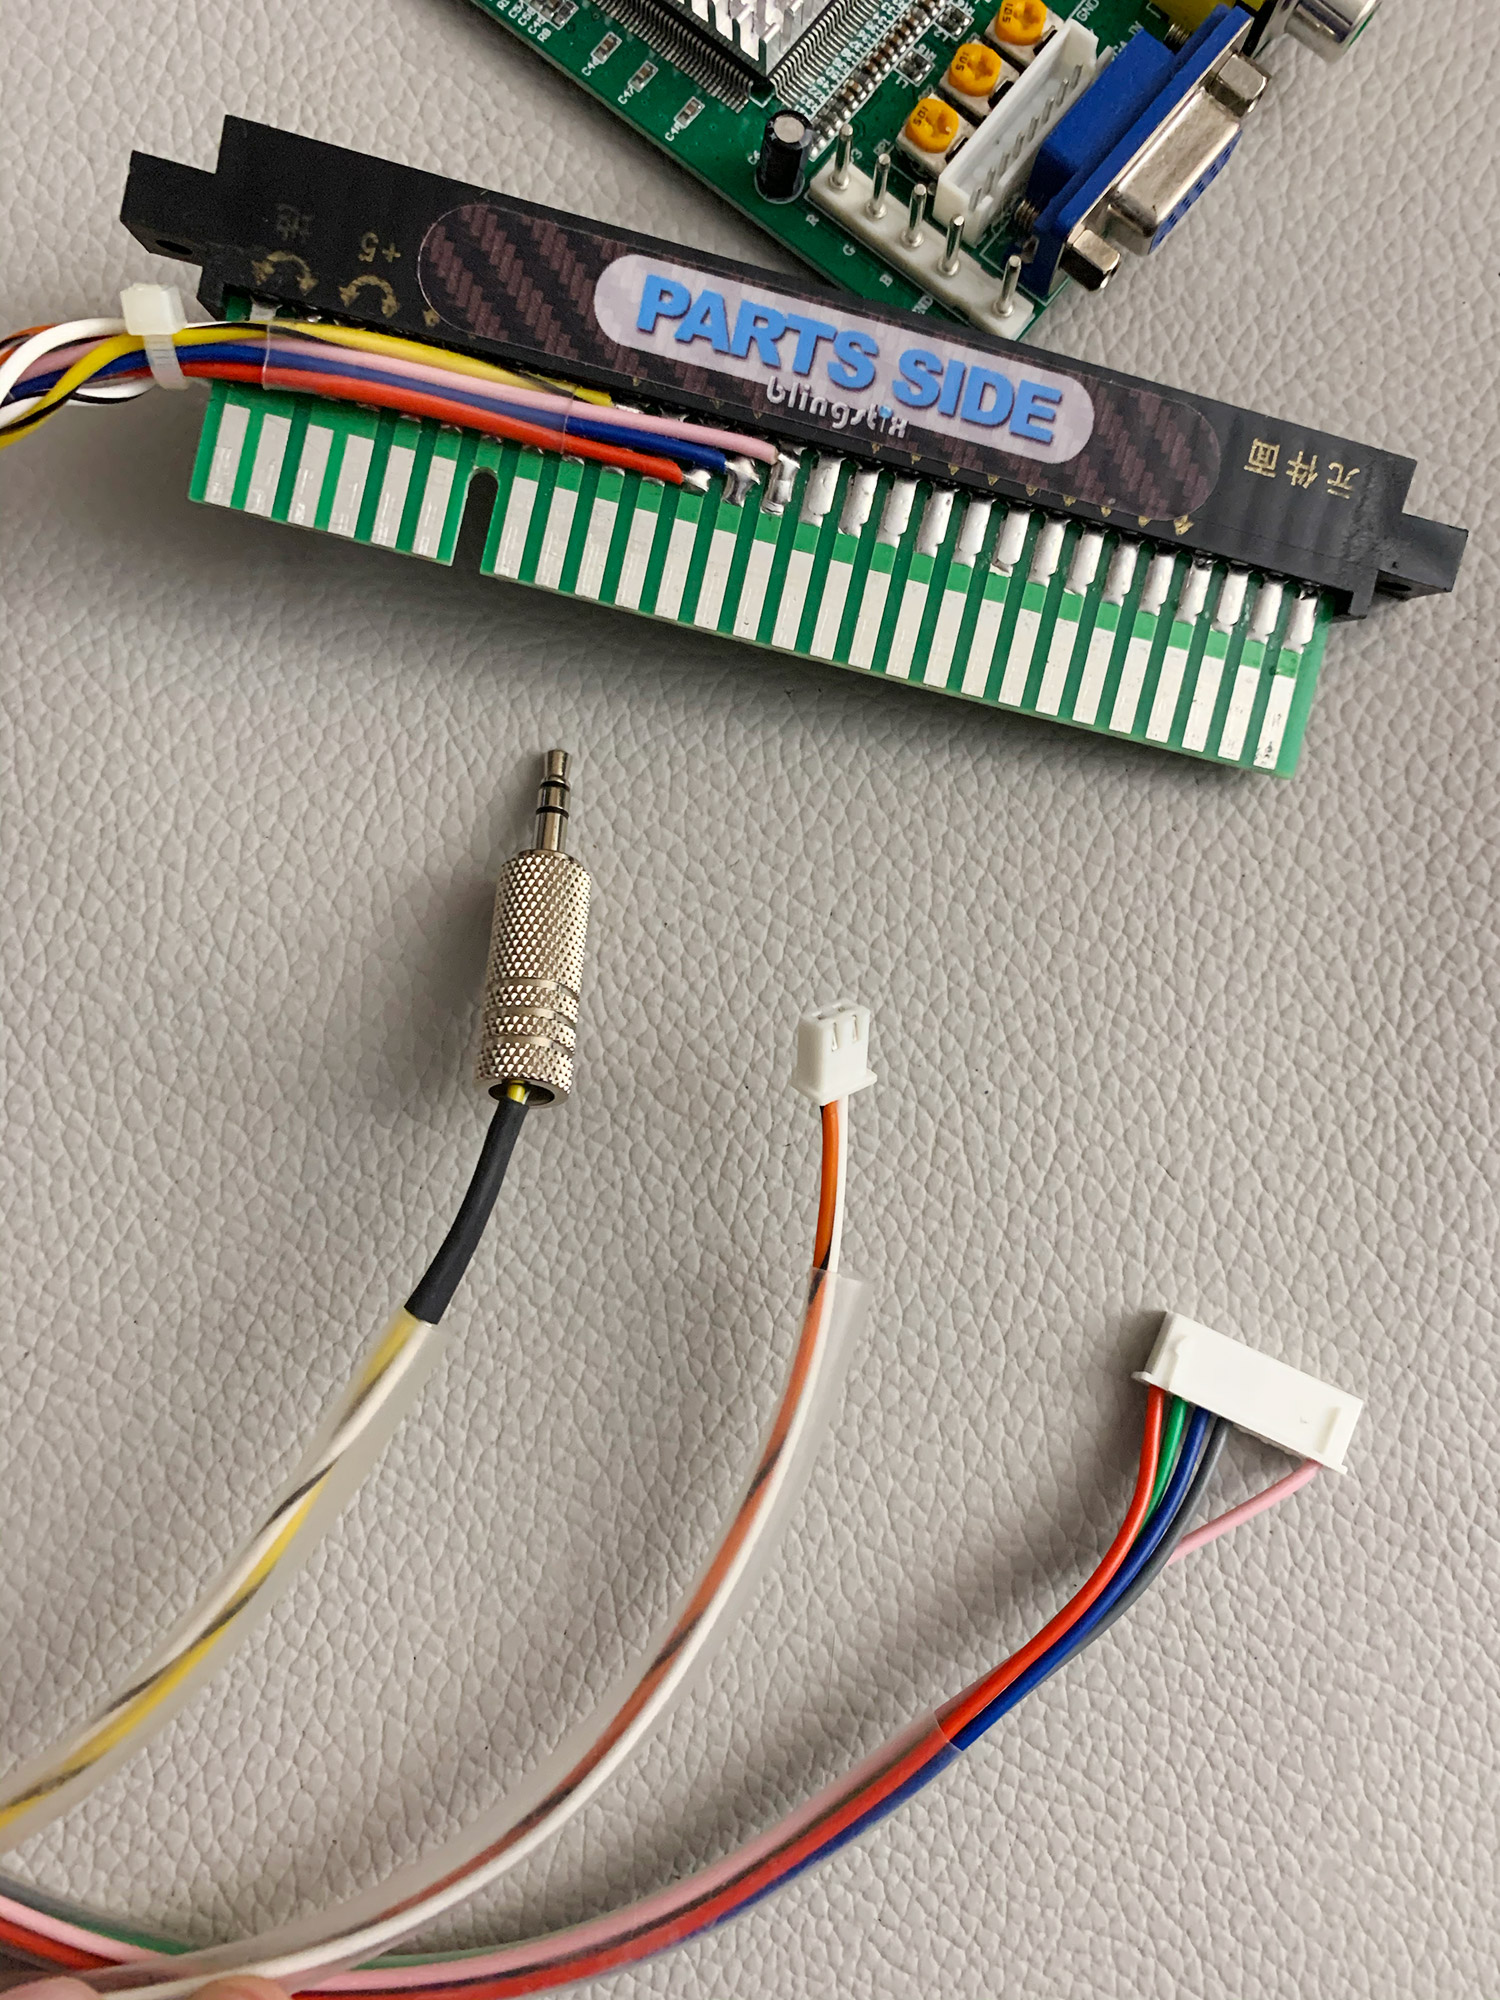 A JAMMA passthrough connector that has a video, audio, and power tap.